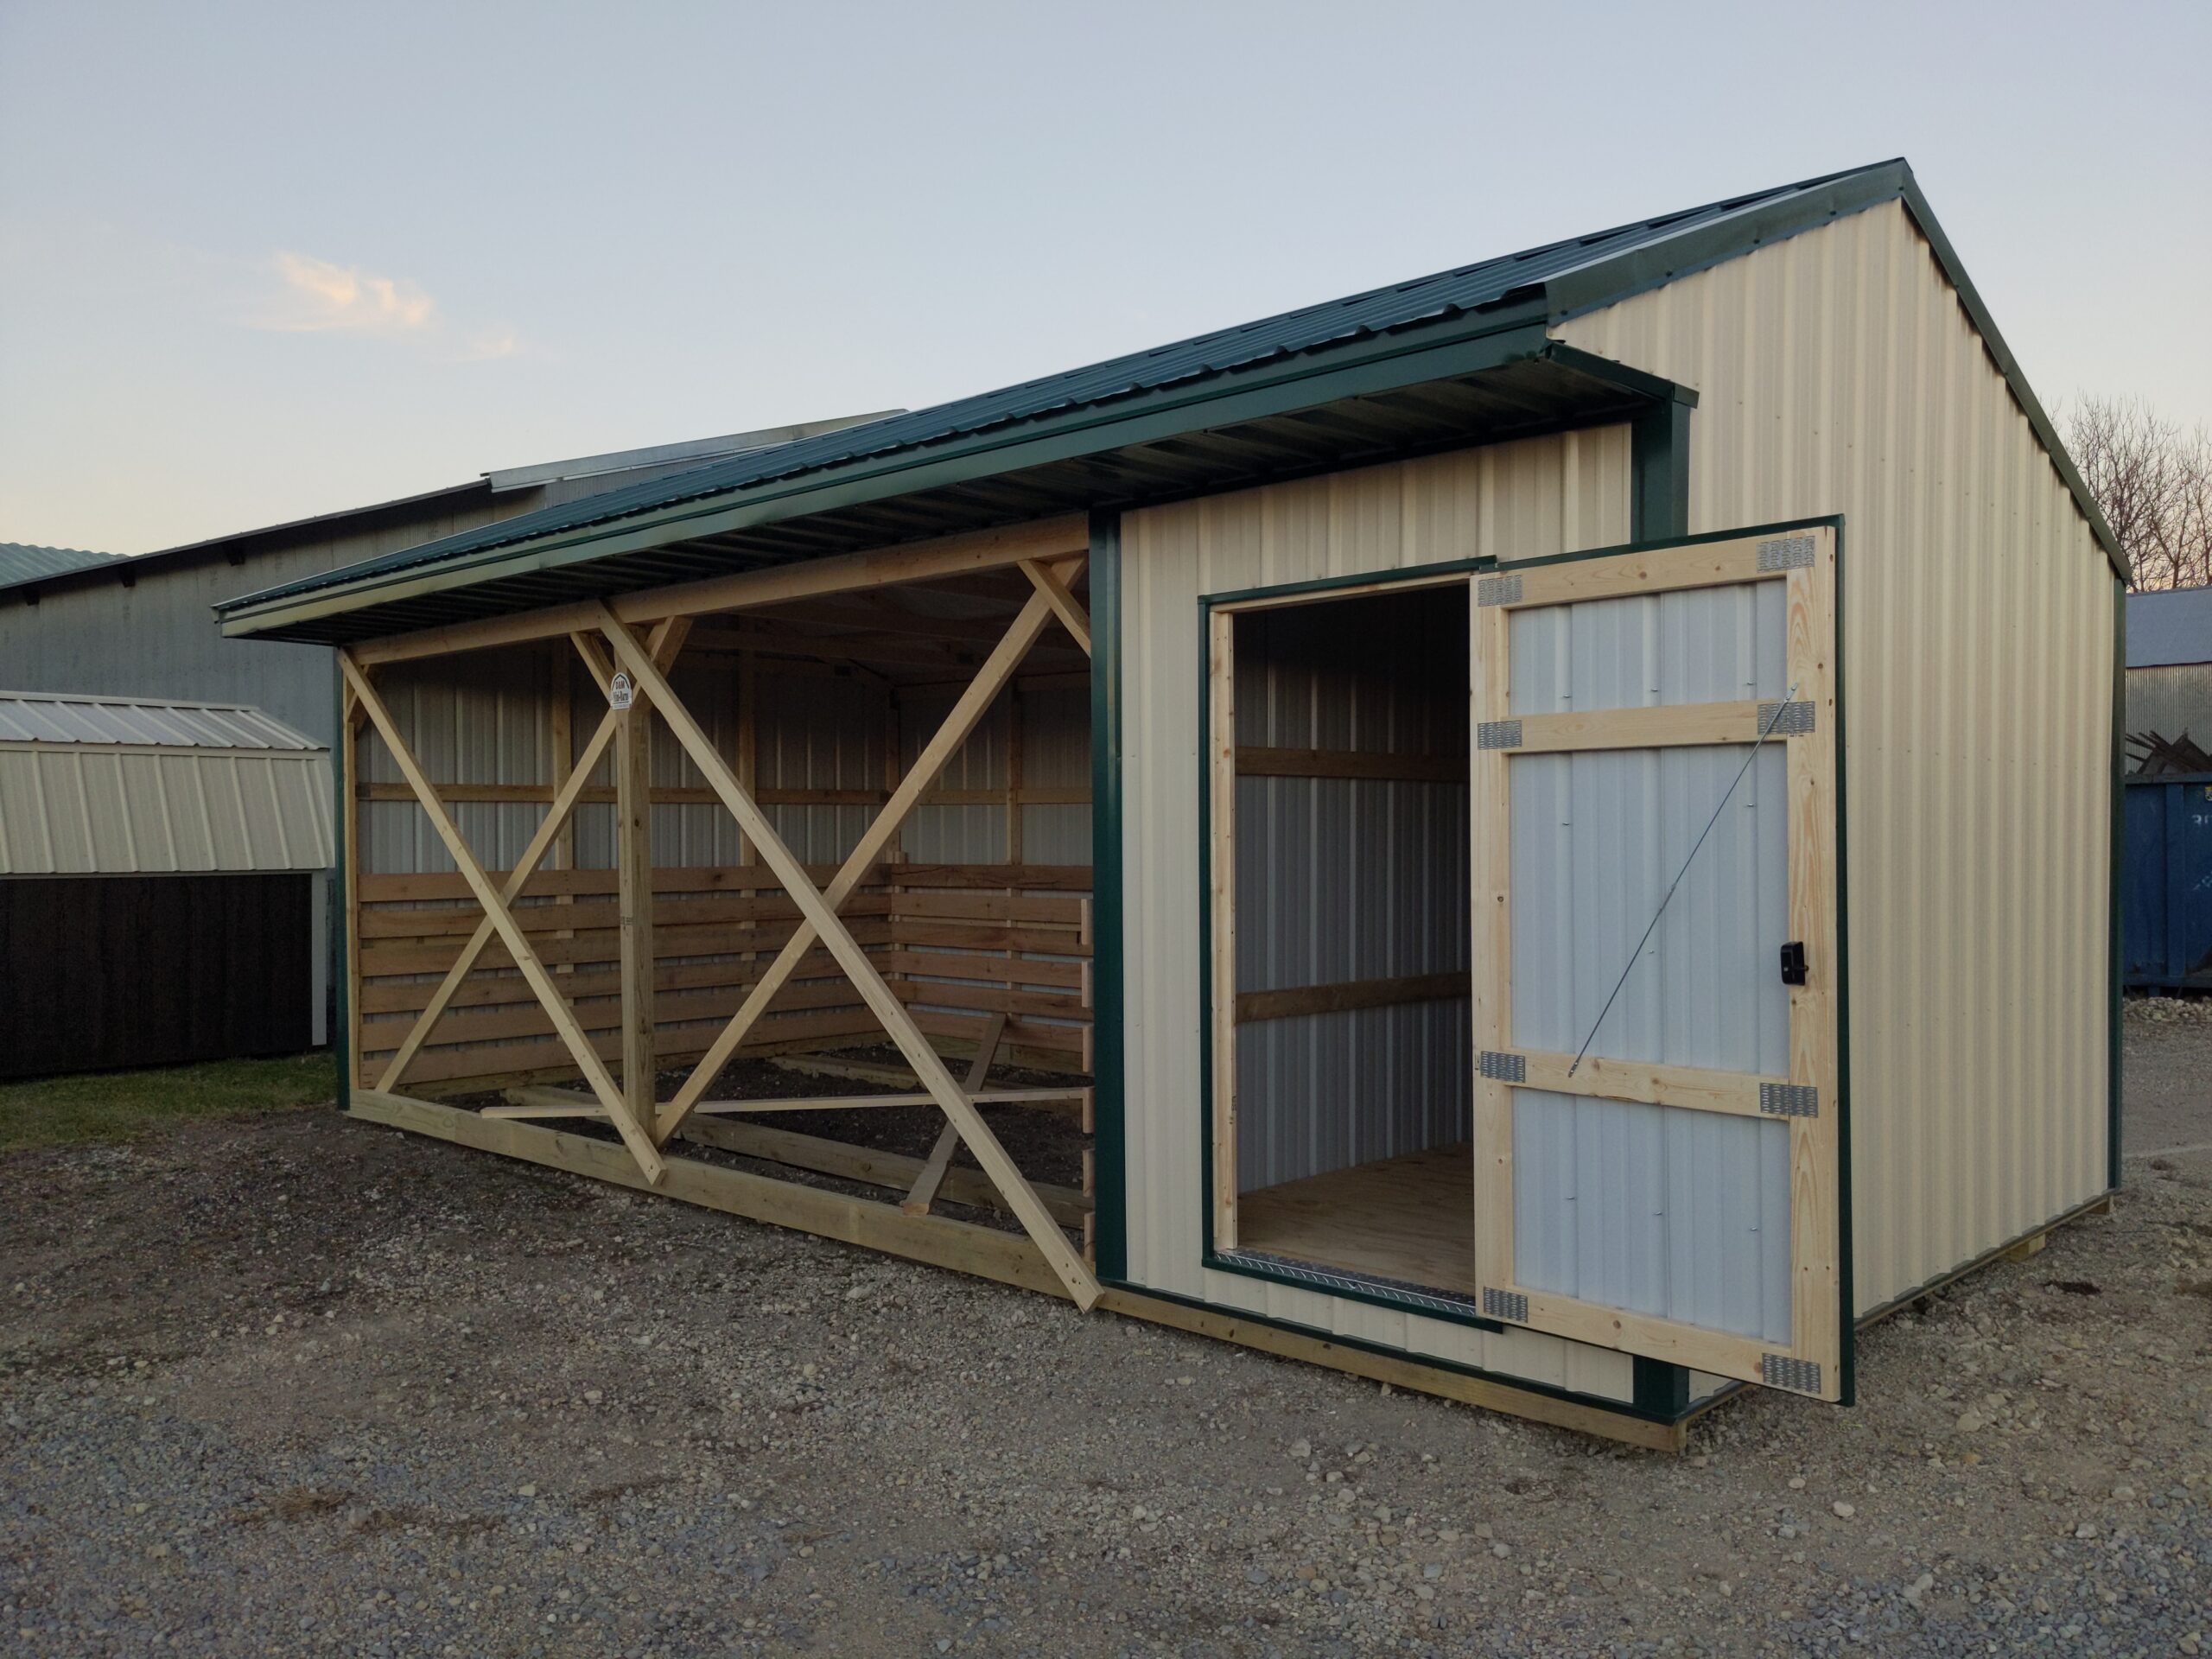 12'x24' Horse Shed Loafing Shed Portable Building Kansas City Missouri